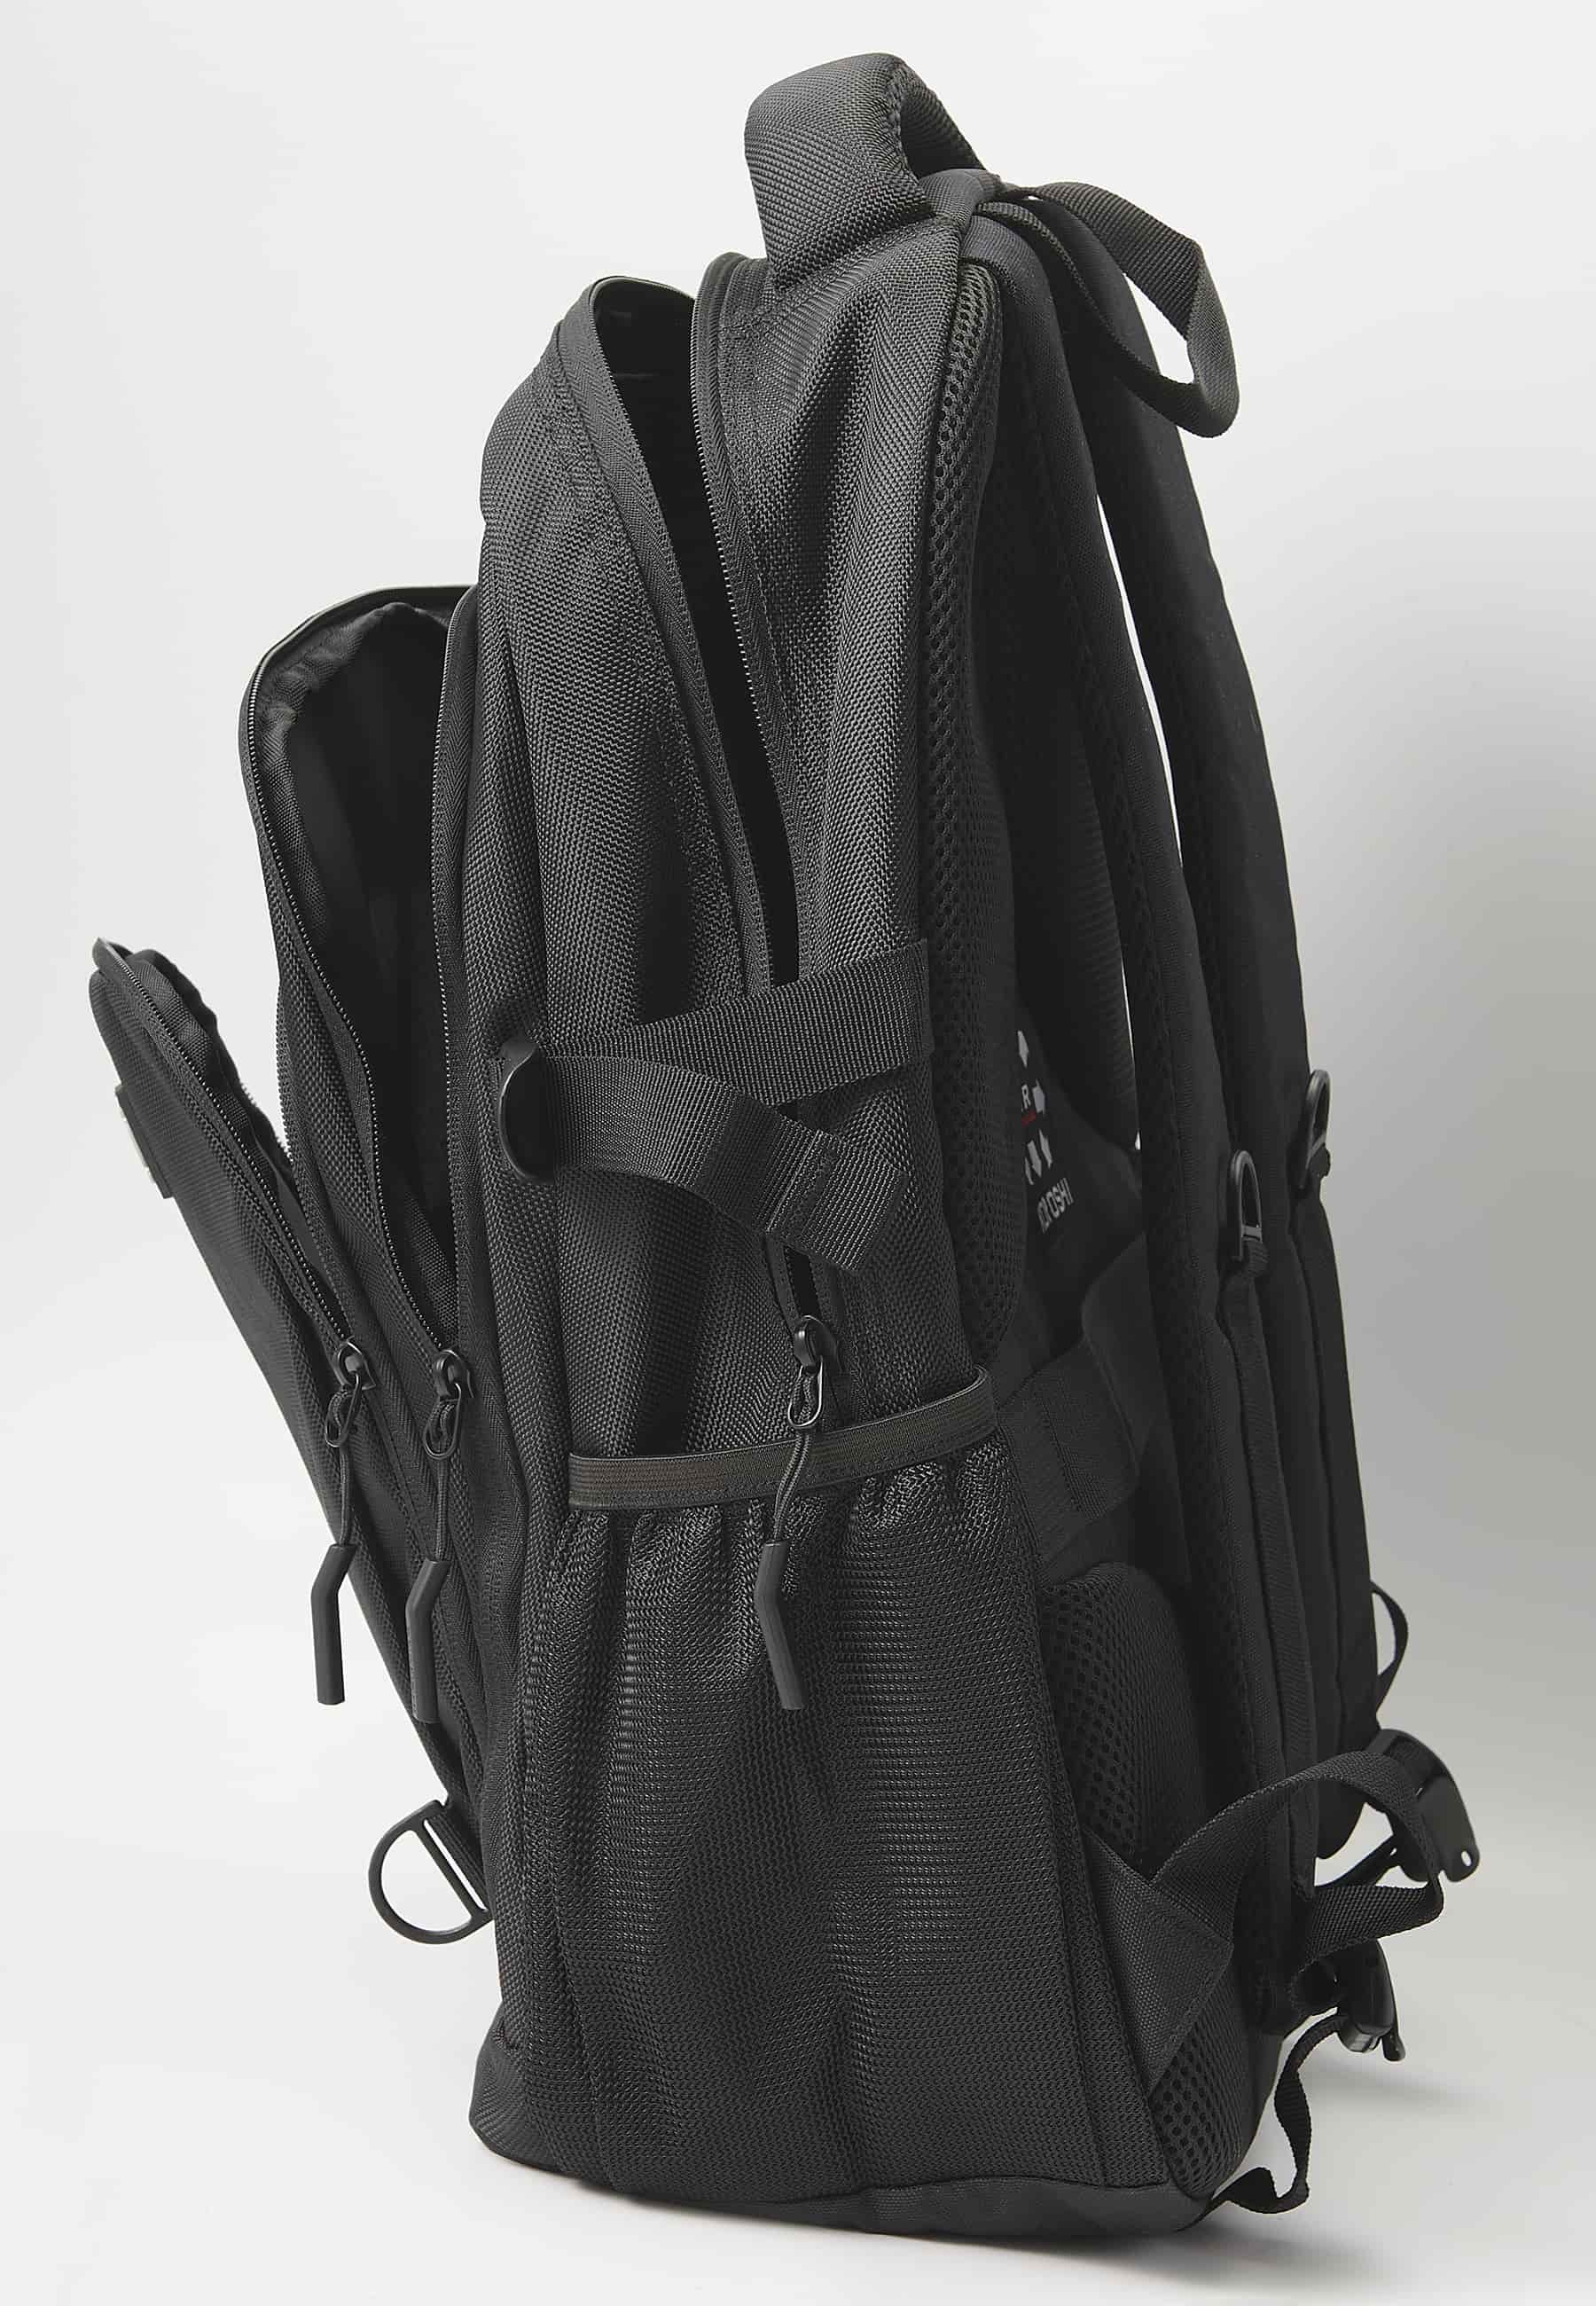 Koröshi backpack with three zippered compartments, one for a laptop, with black interior pockets